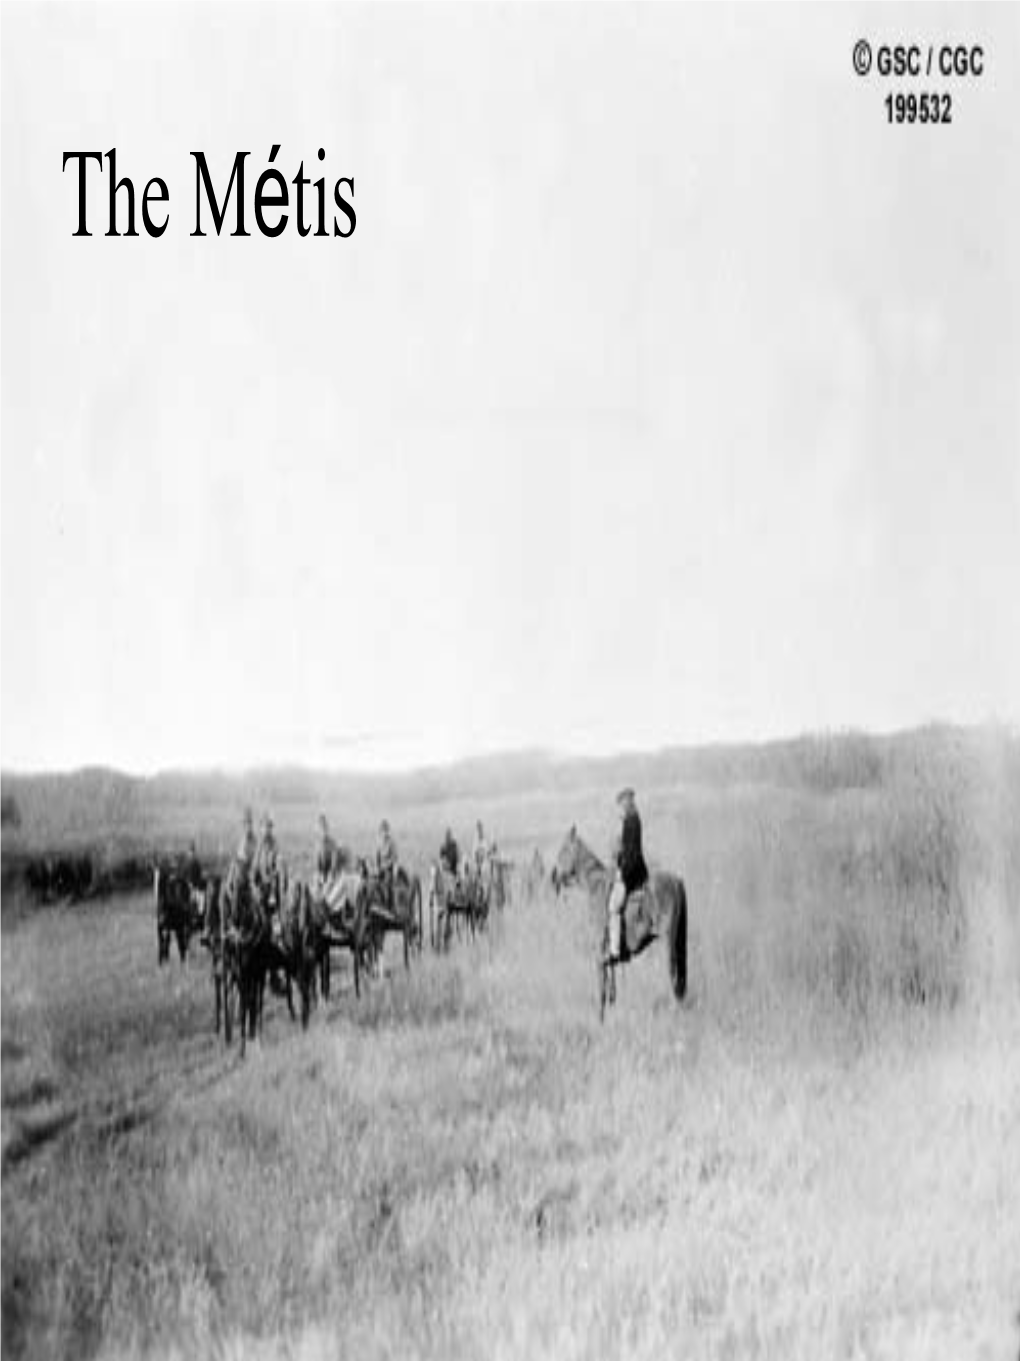 Jerry Potts, a Métis Guide and Hunter, Who Led Them to Their Goal and Taught Them How to Survive